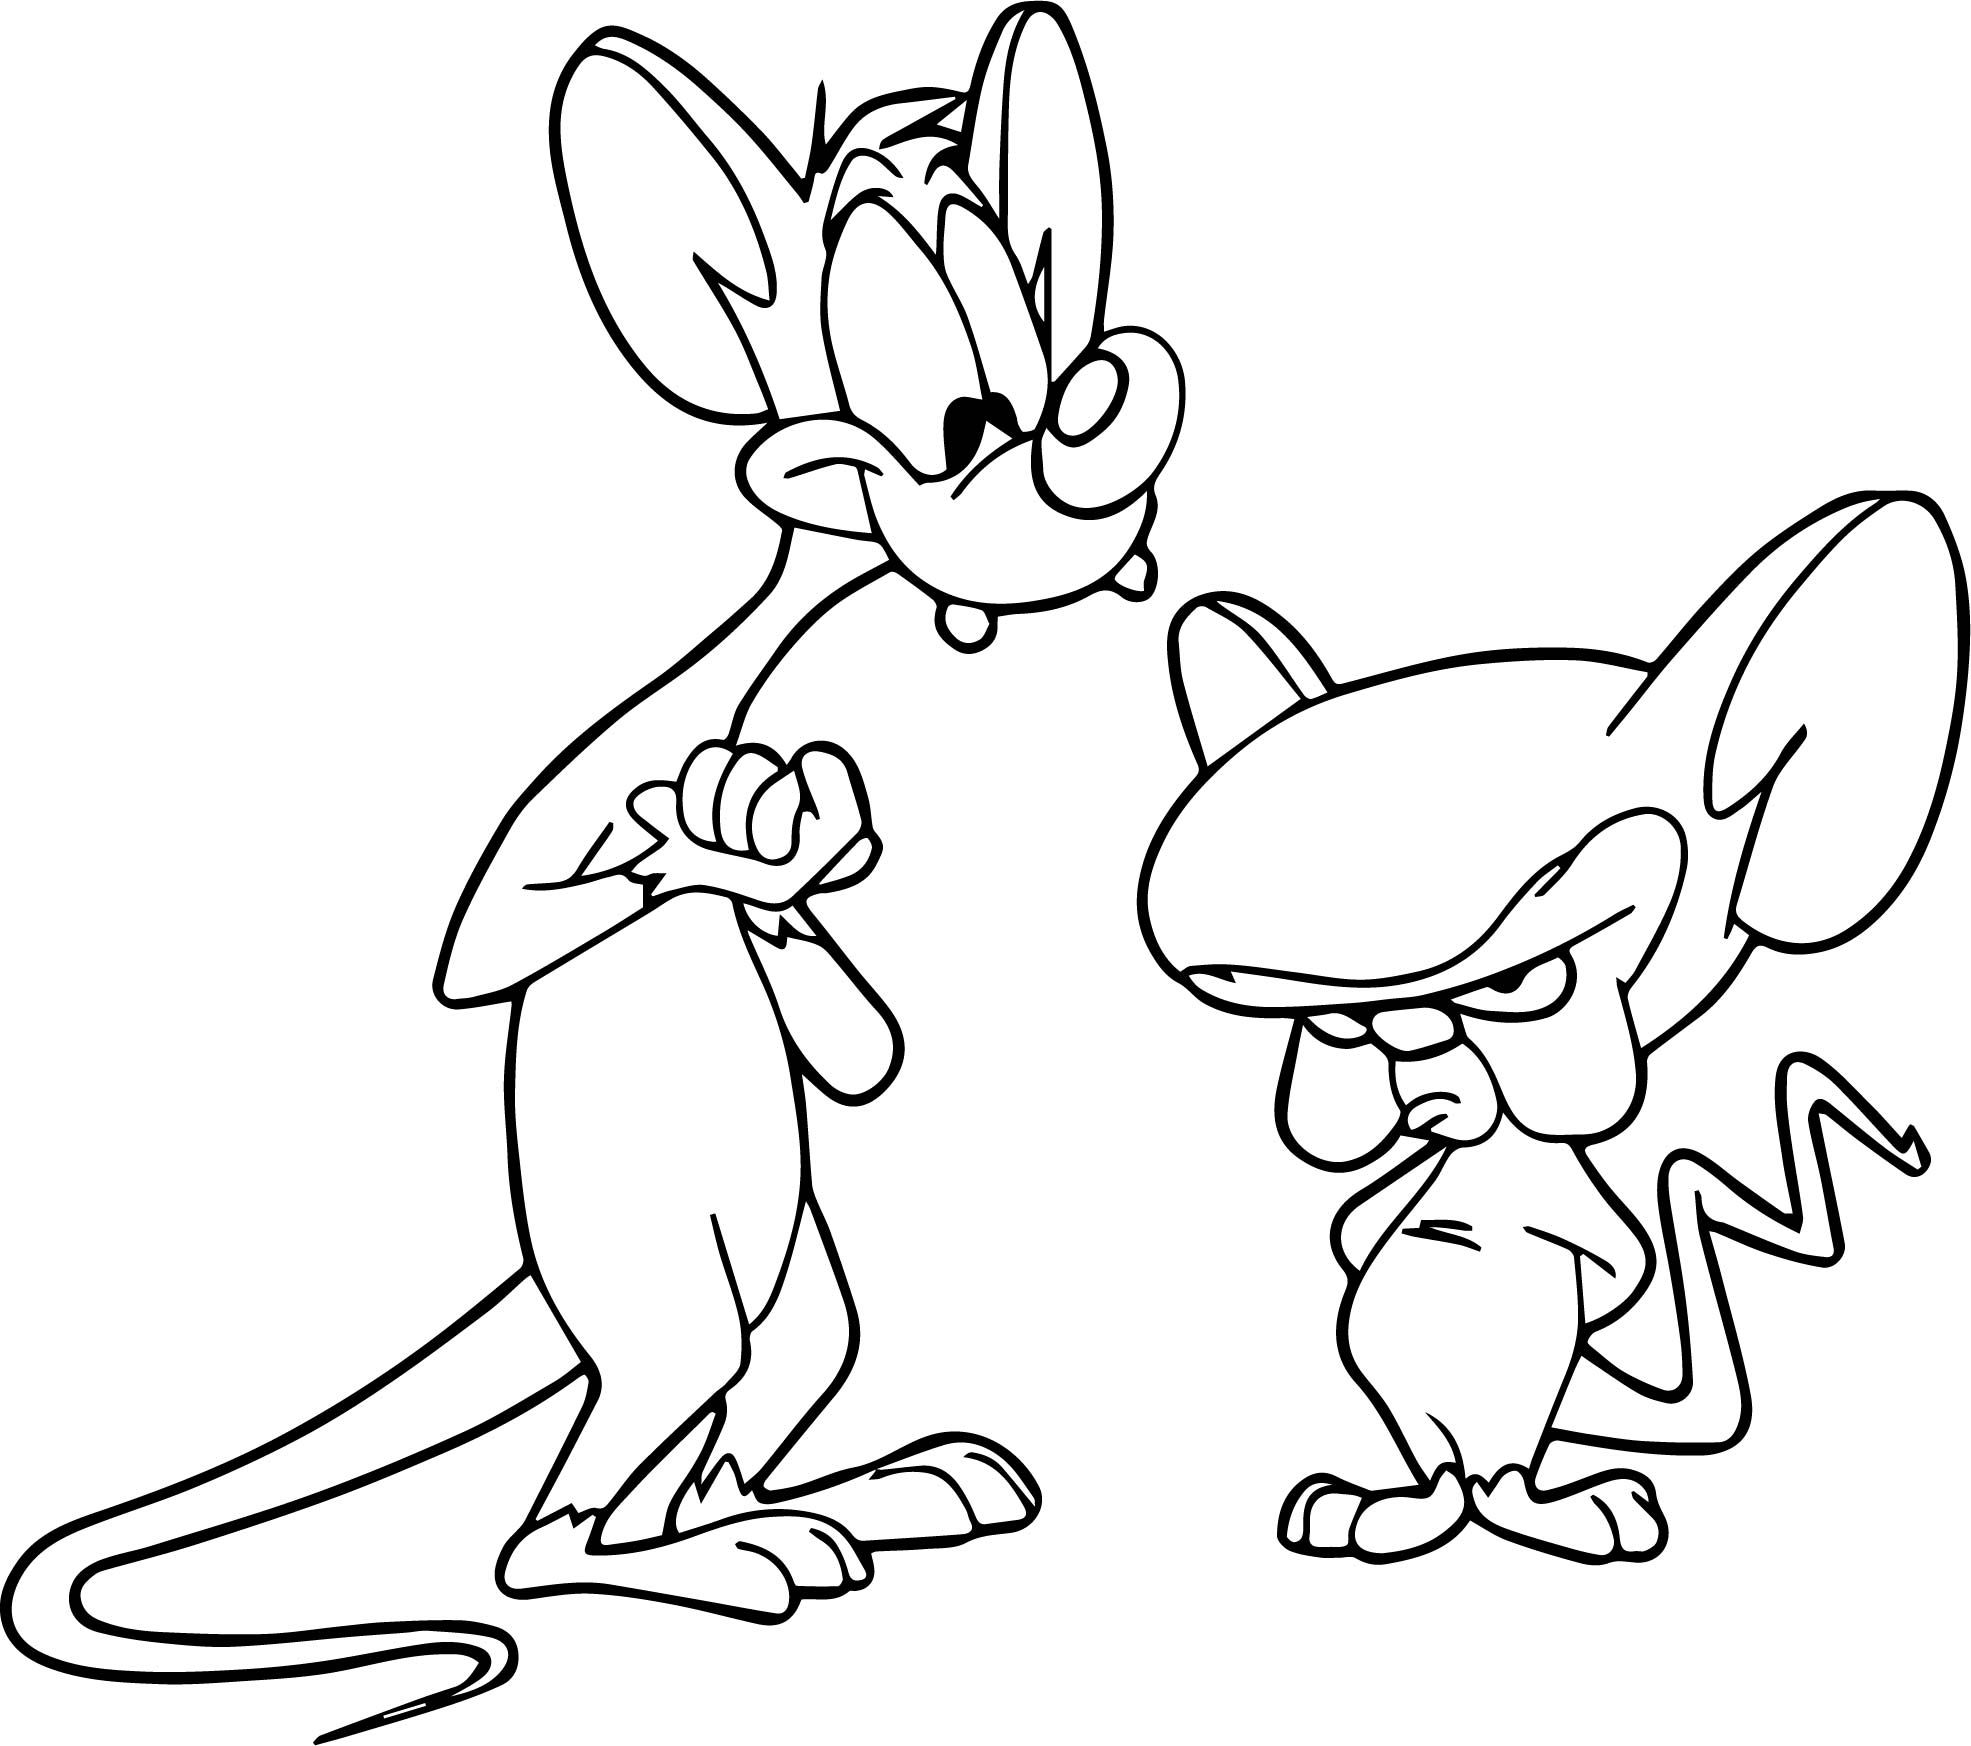 Pinky and the Brain Coloring Pages - Best Coloring Pages For Kids